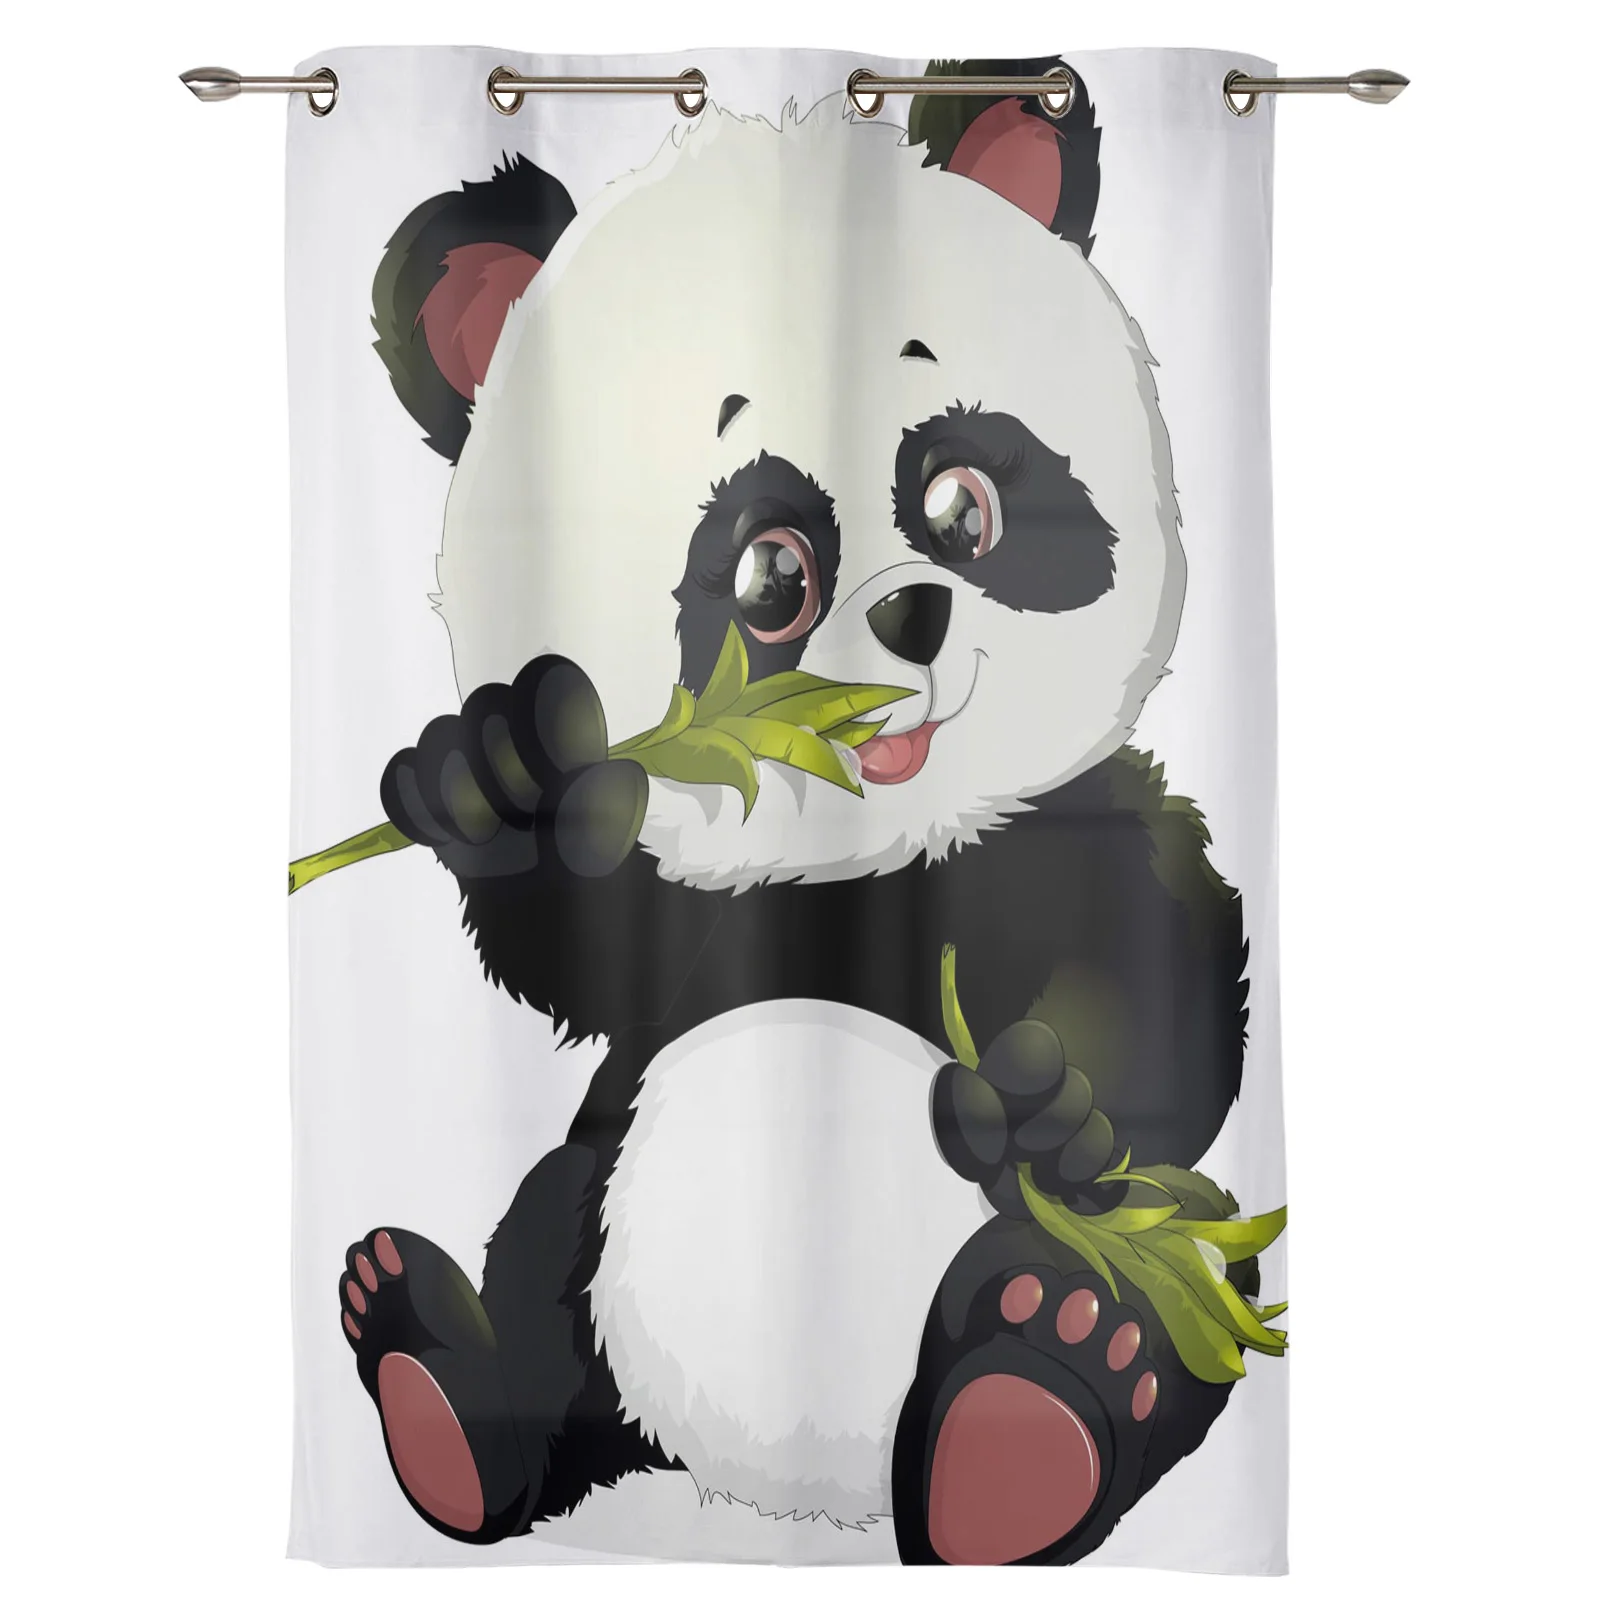 Animal Cute Panda Bamboo Window Curtains Bedroom Kitchen Decor Curtain  Panel Window Curtains for Living Room|Curtains| - AliExpress